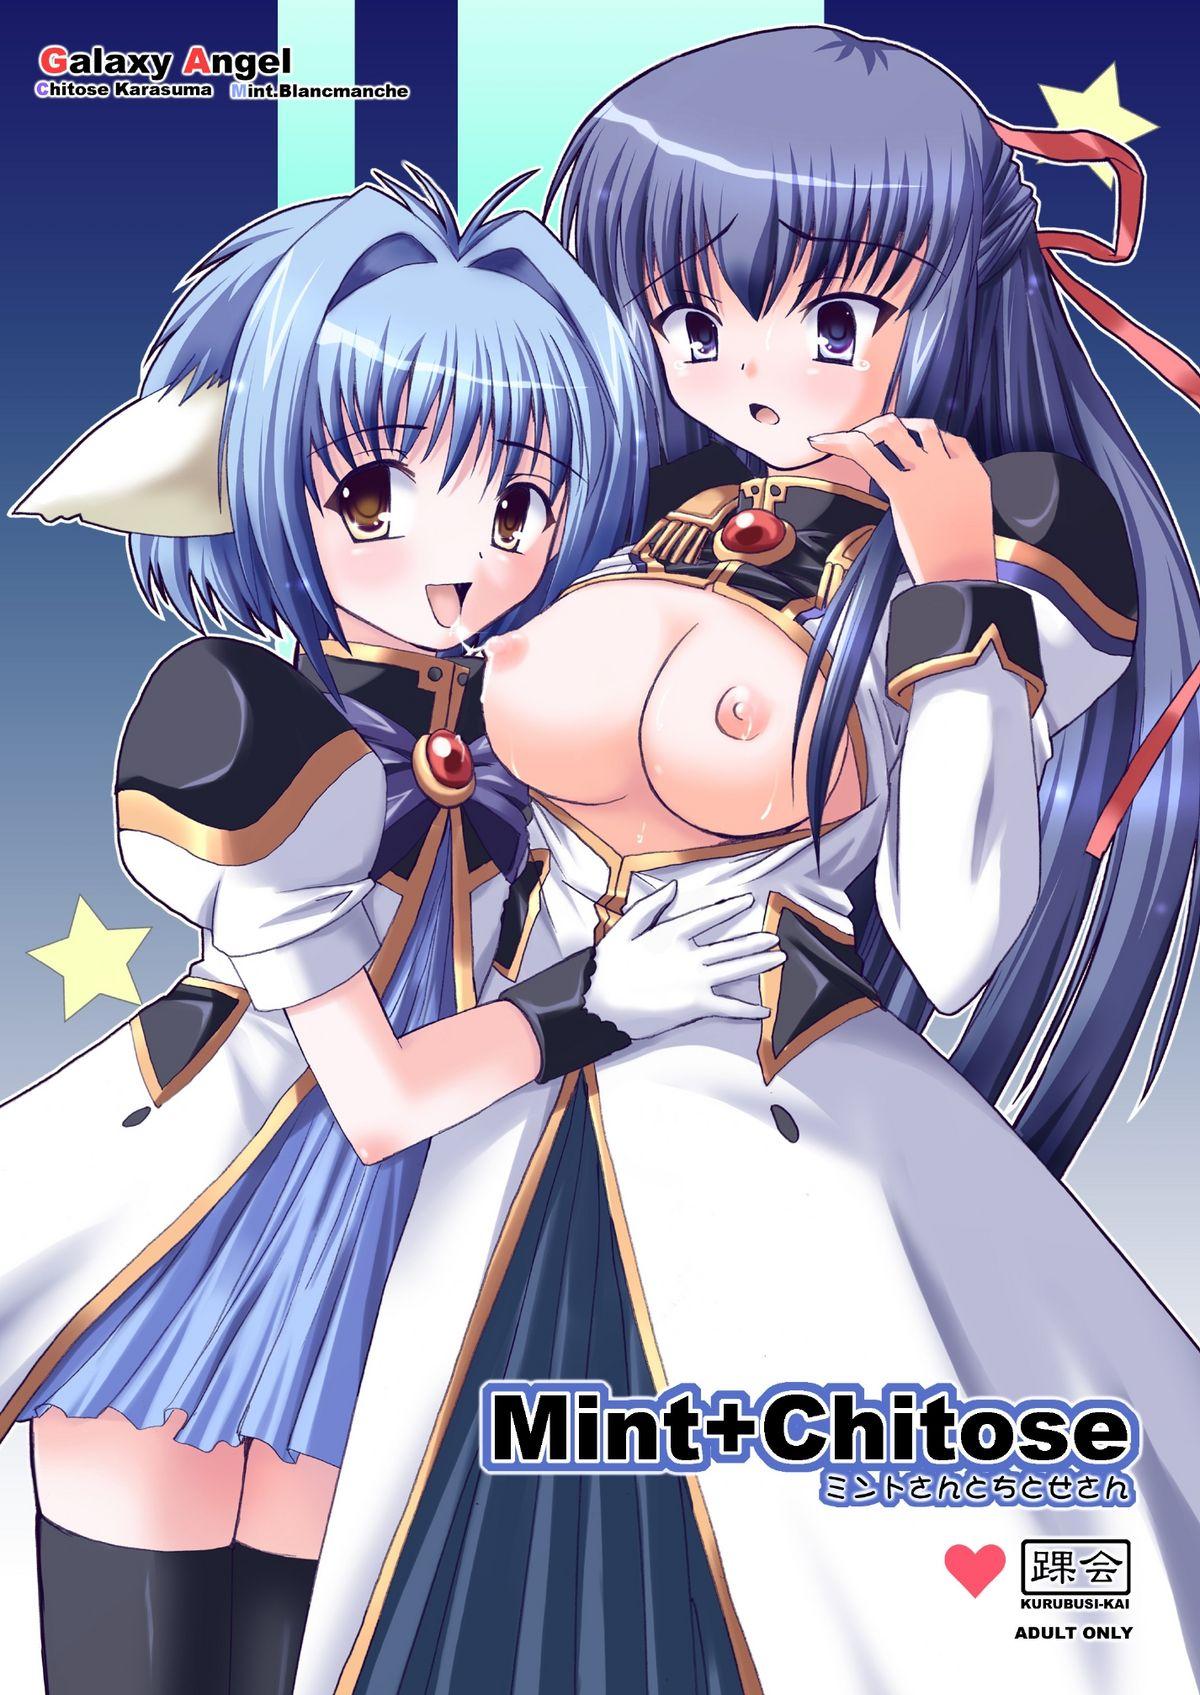 Shy Mint+Chitose - Galaxy angel Spy - Picture 1